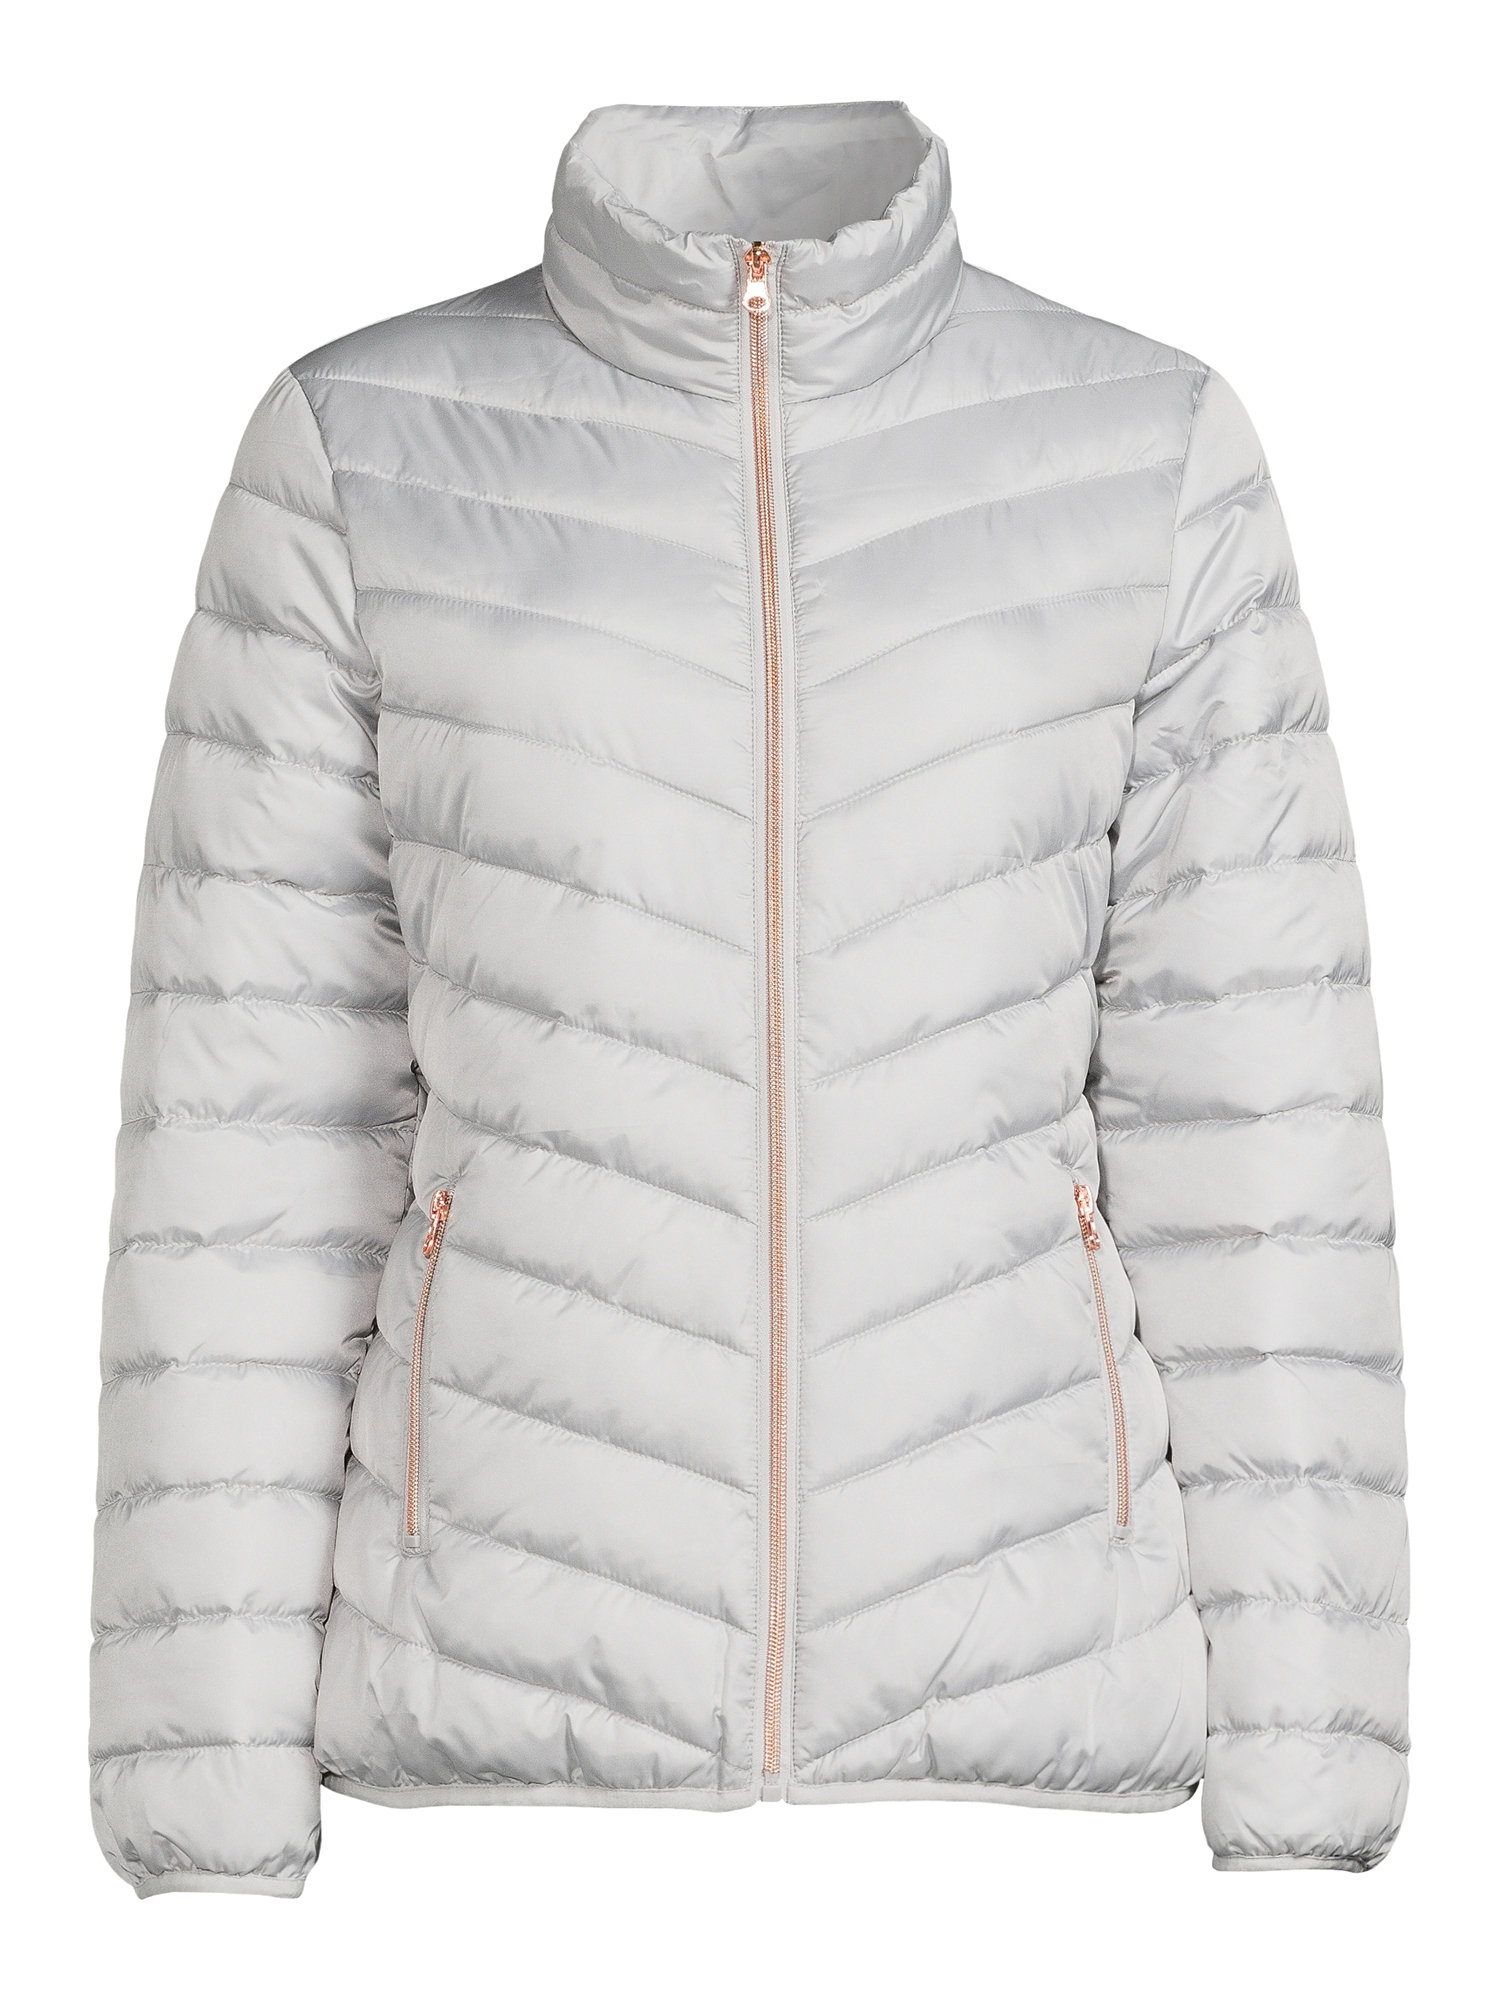 Big Chill Women's Packable Puffer Jacket, Sizes S-XL - image 4 of 5